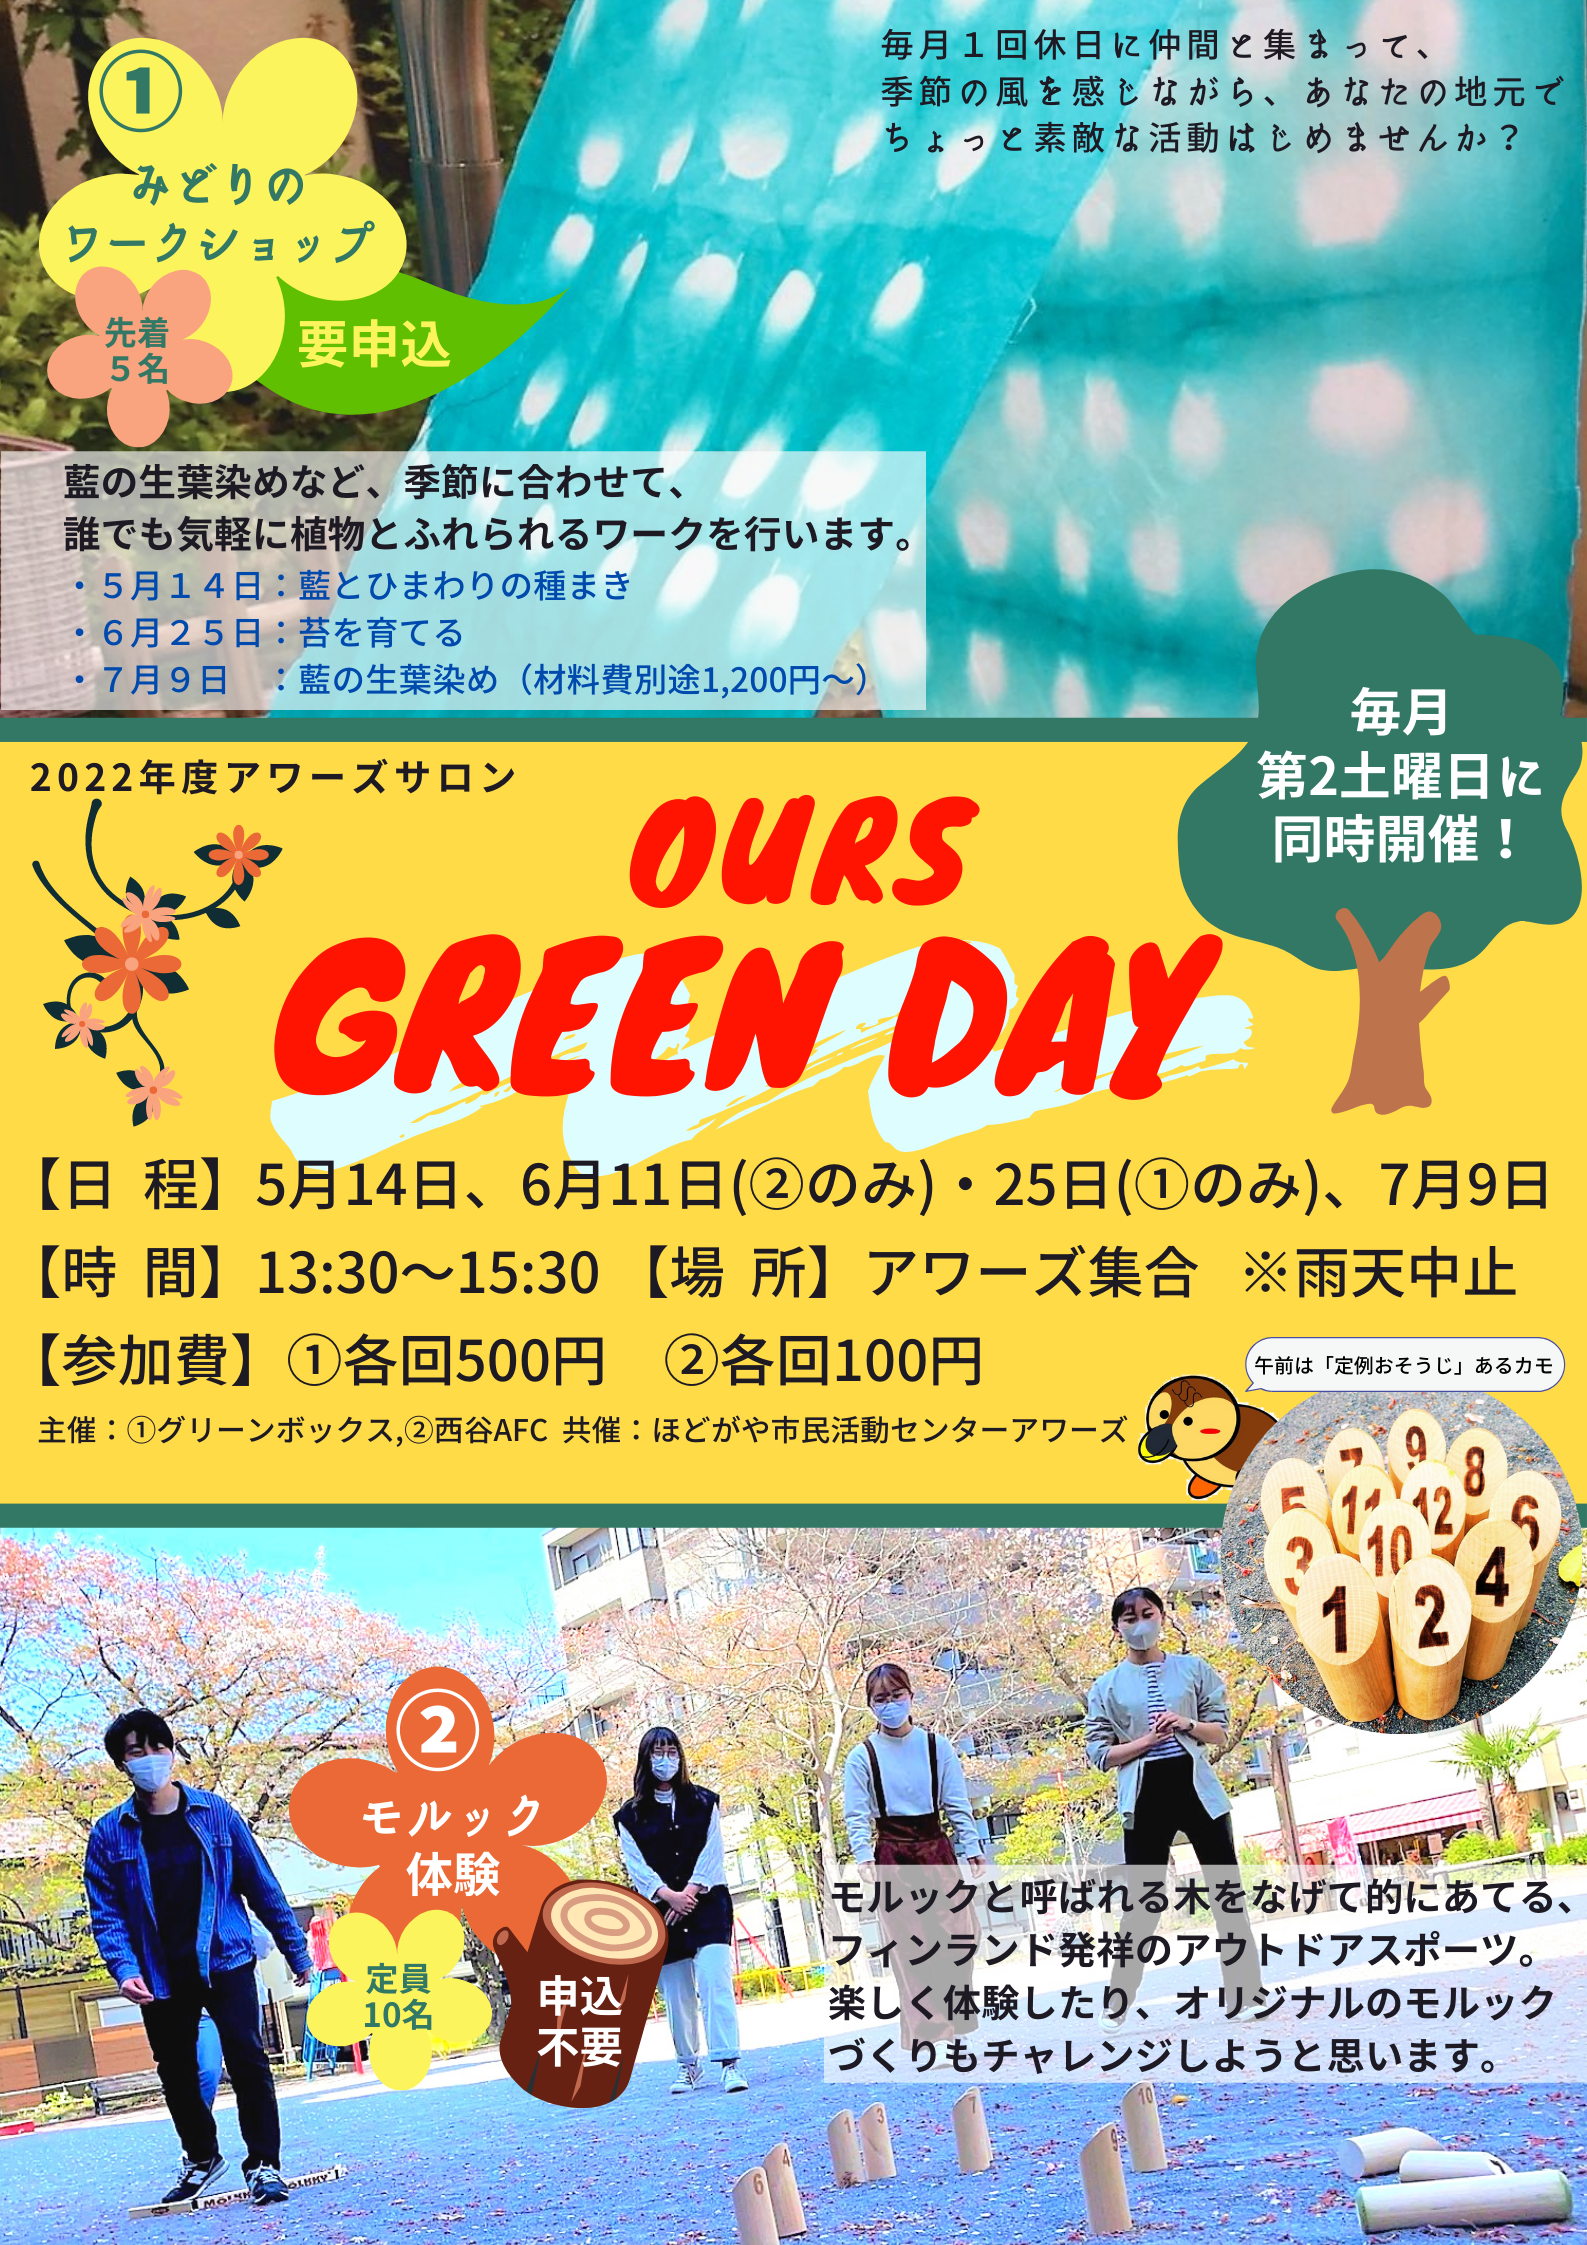 OURS GREEN DAYの画像